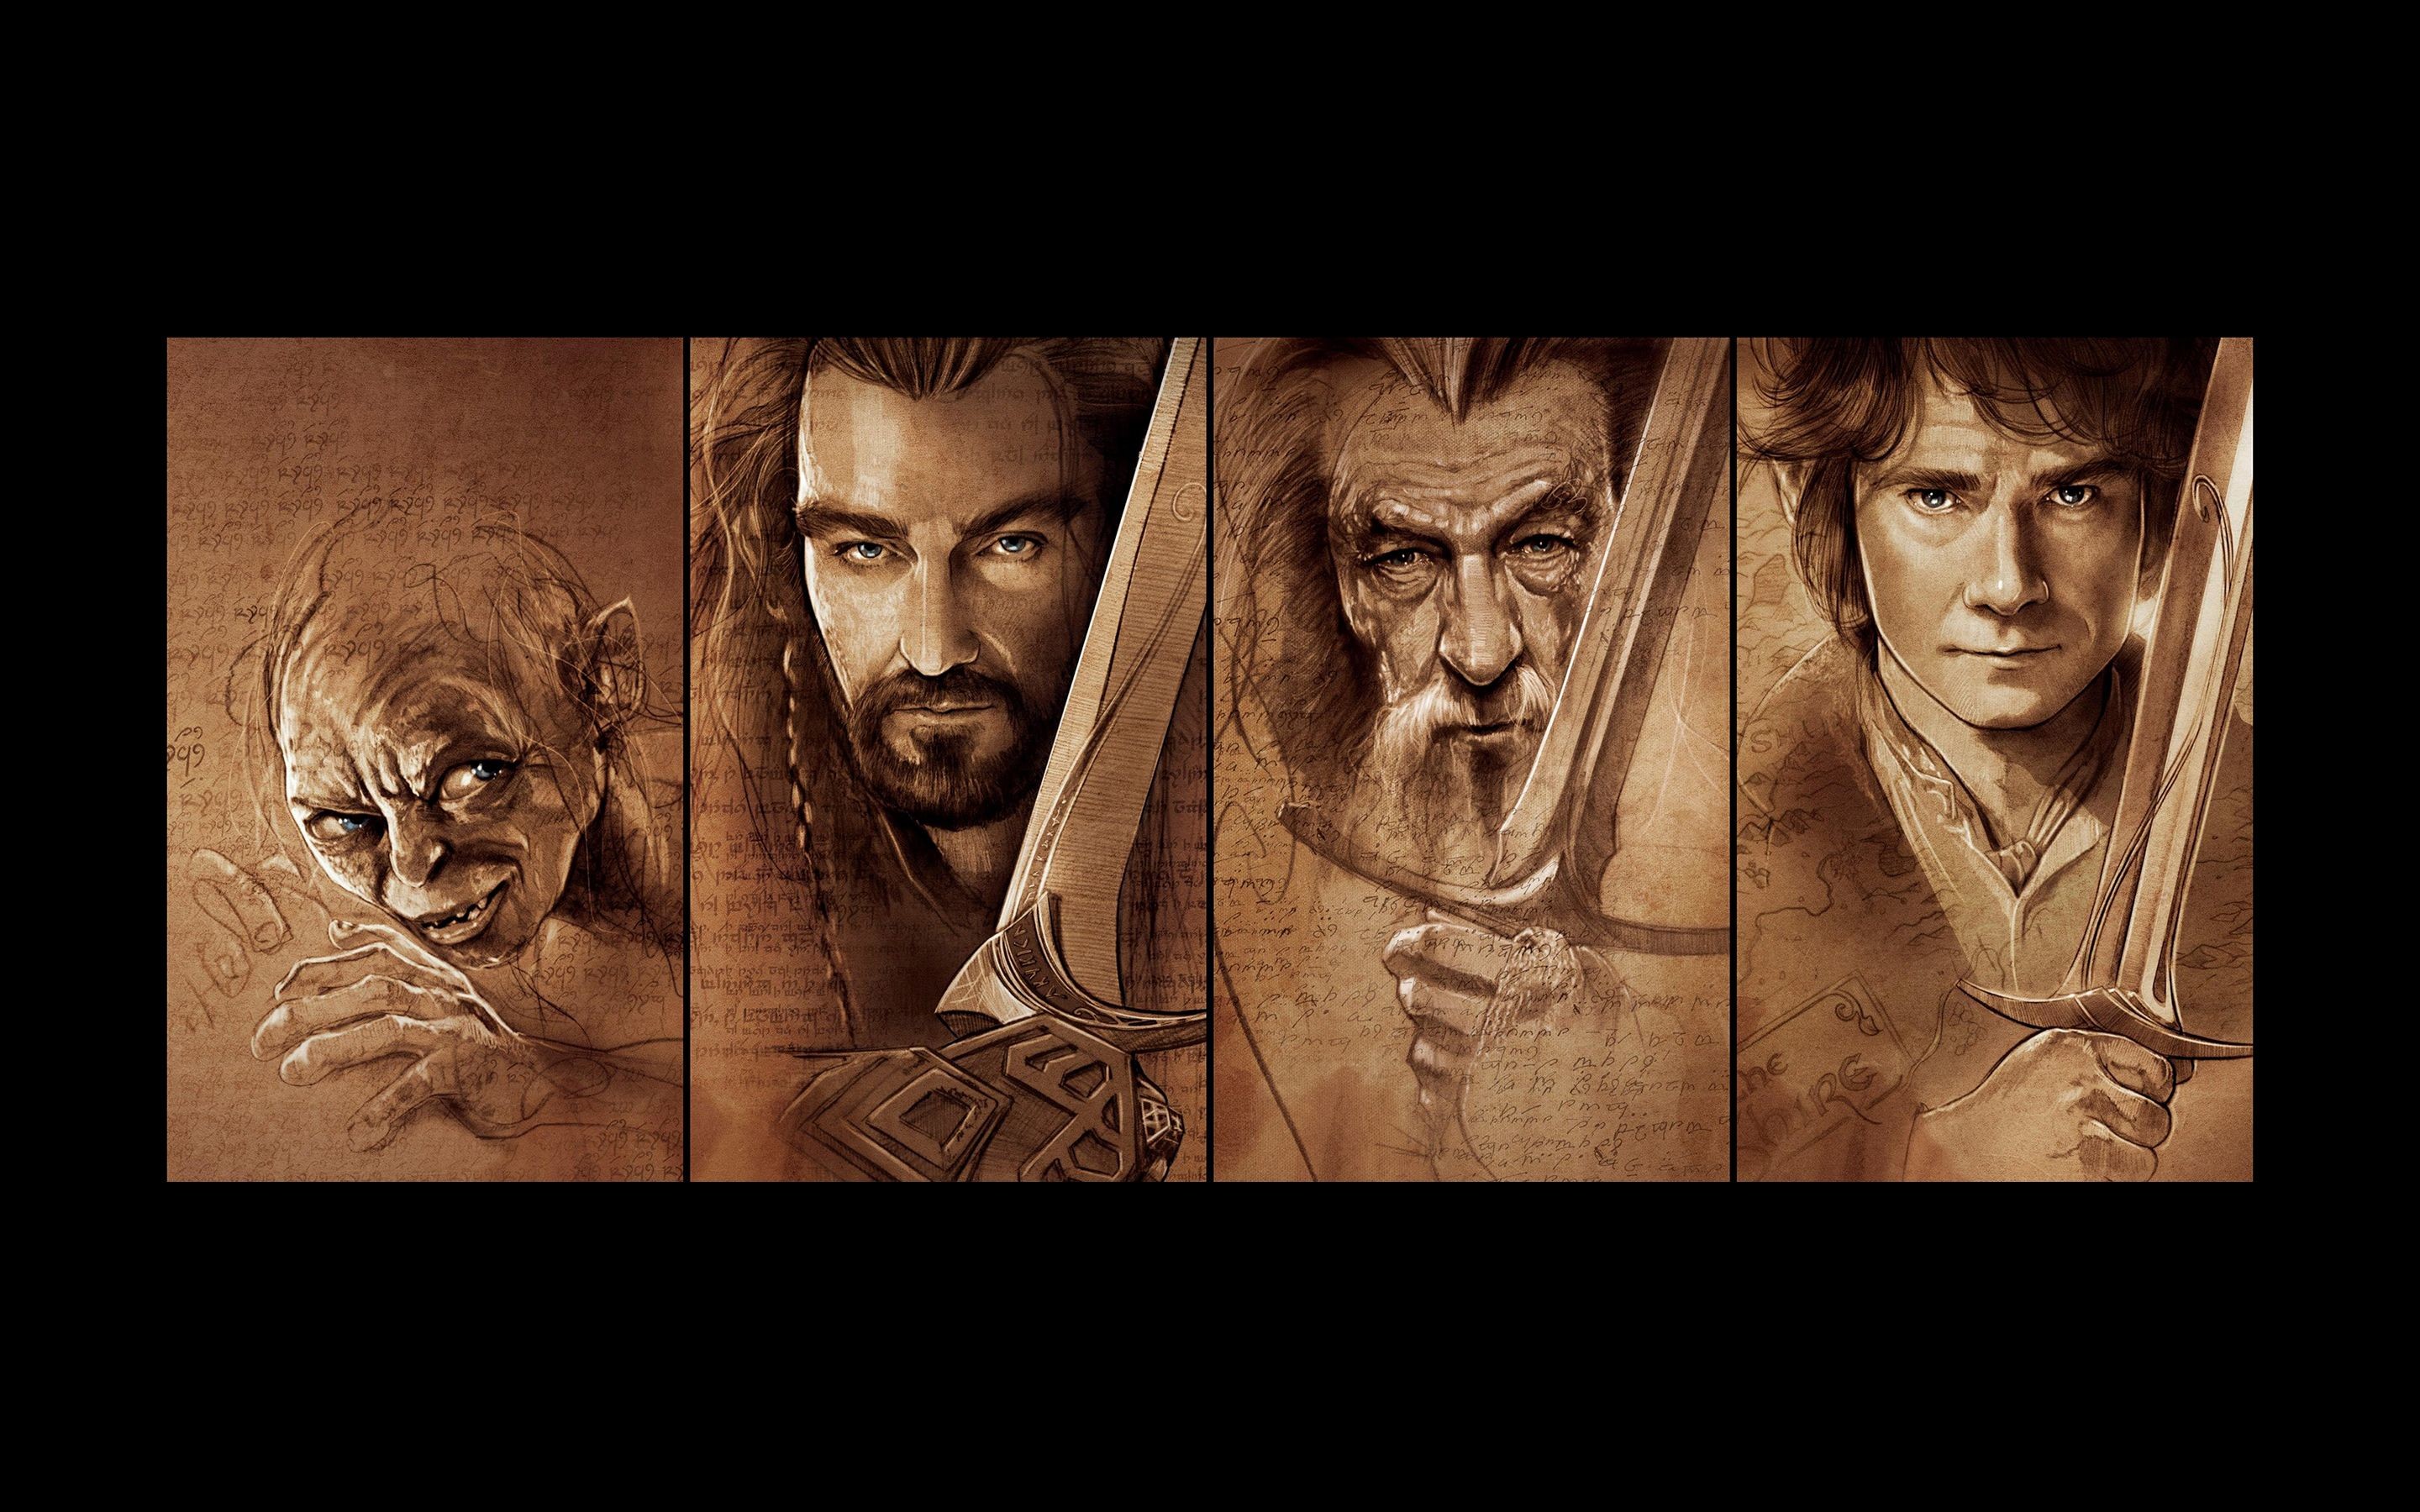 2880x1800 The Lord of the Rings The Hobbit Sword Drawing Gollum Smeagol Gandalf  Thorin wallpaper |  | 45616 | WallpaperUP